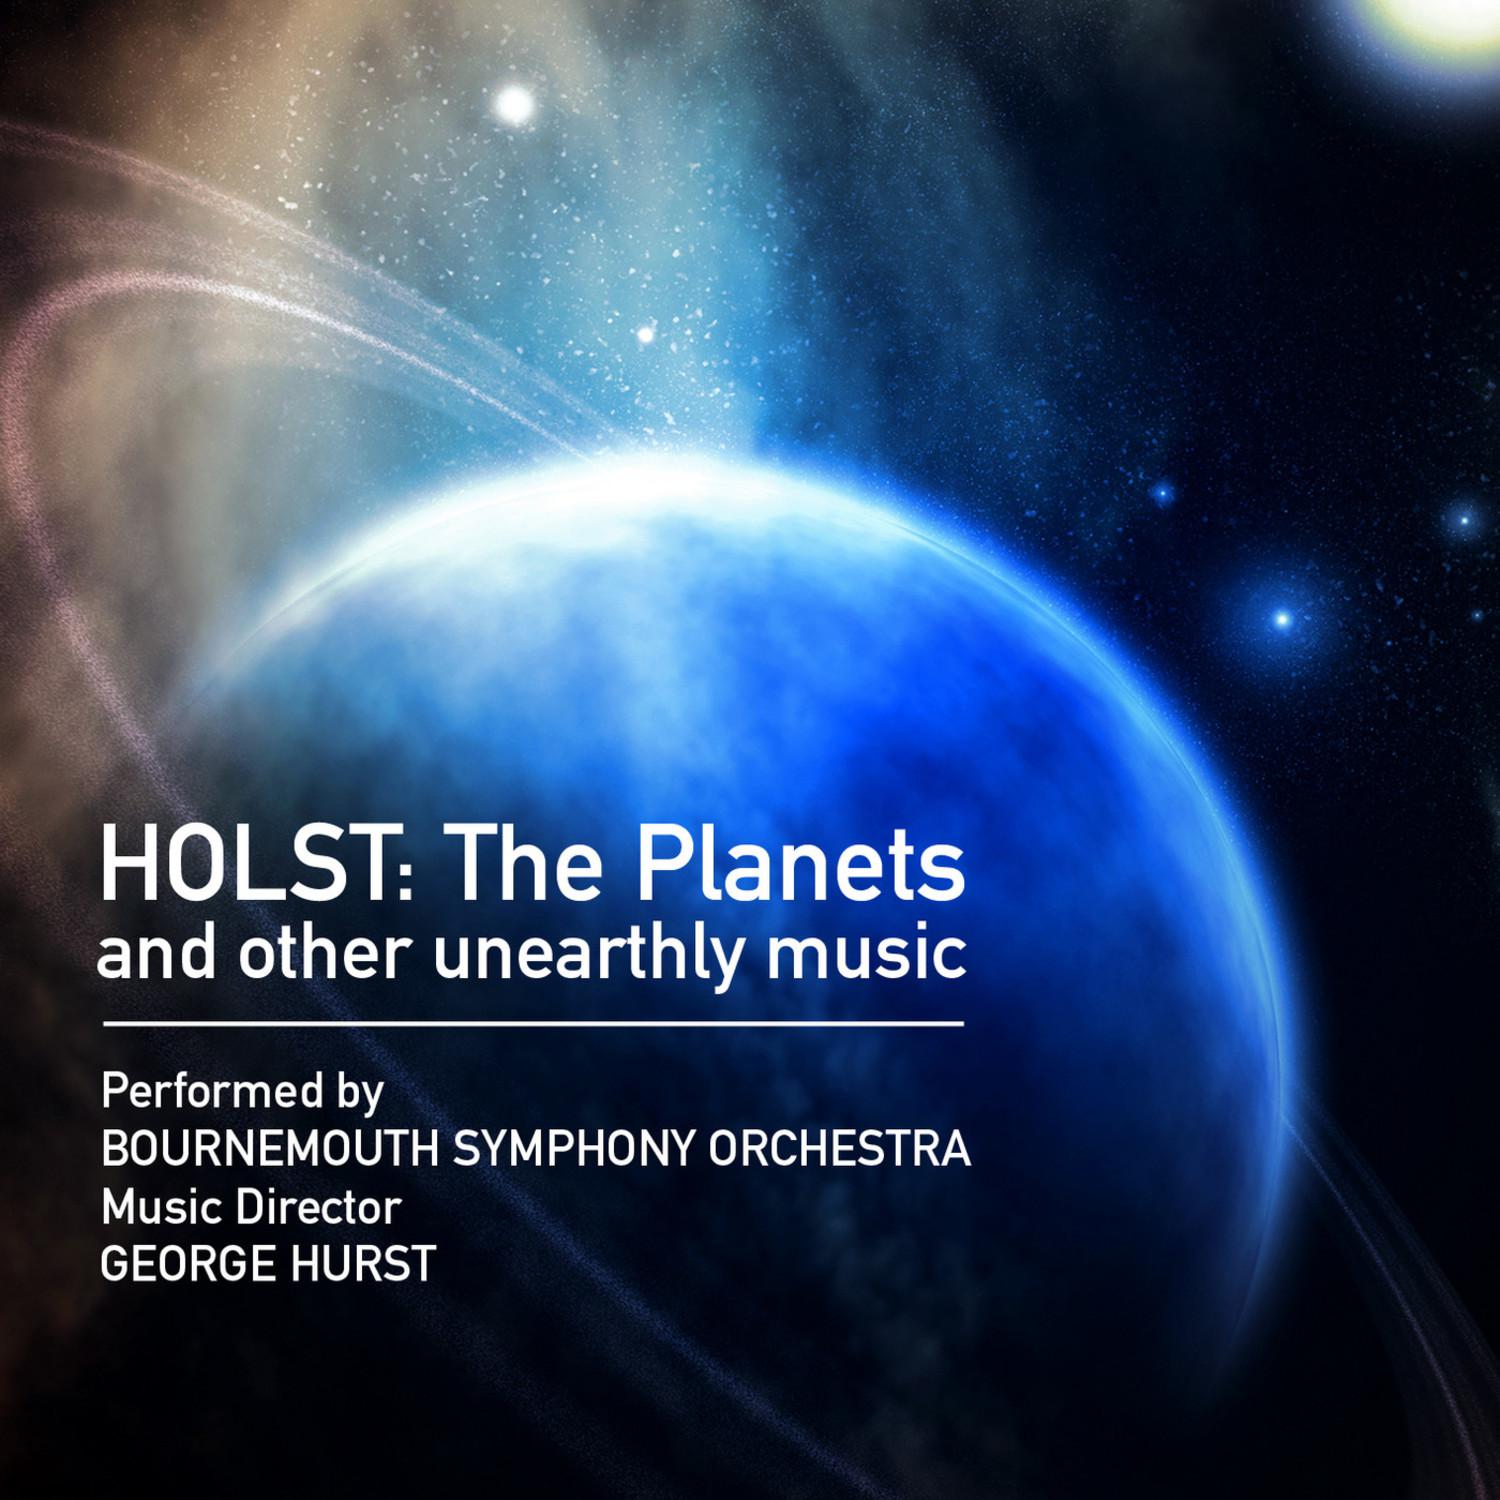 The Planets, Suite for Large Orchestra, Op. 32: III. Mercury - The Winged Messanger